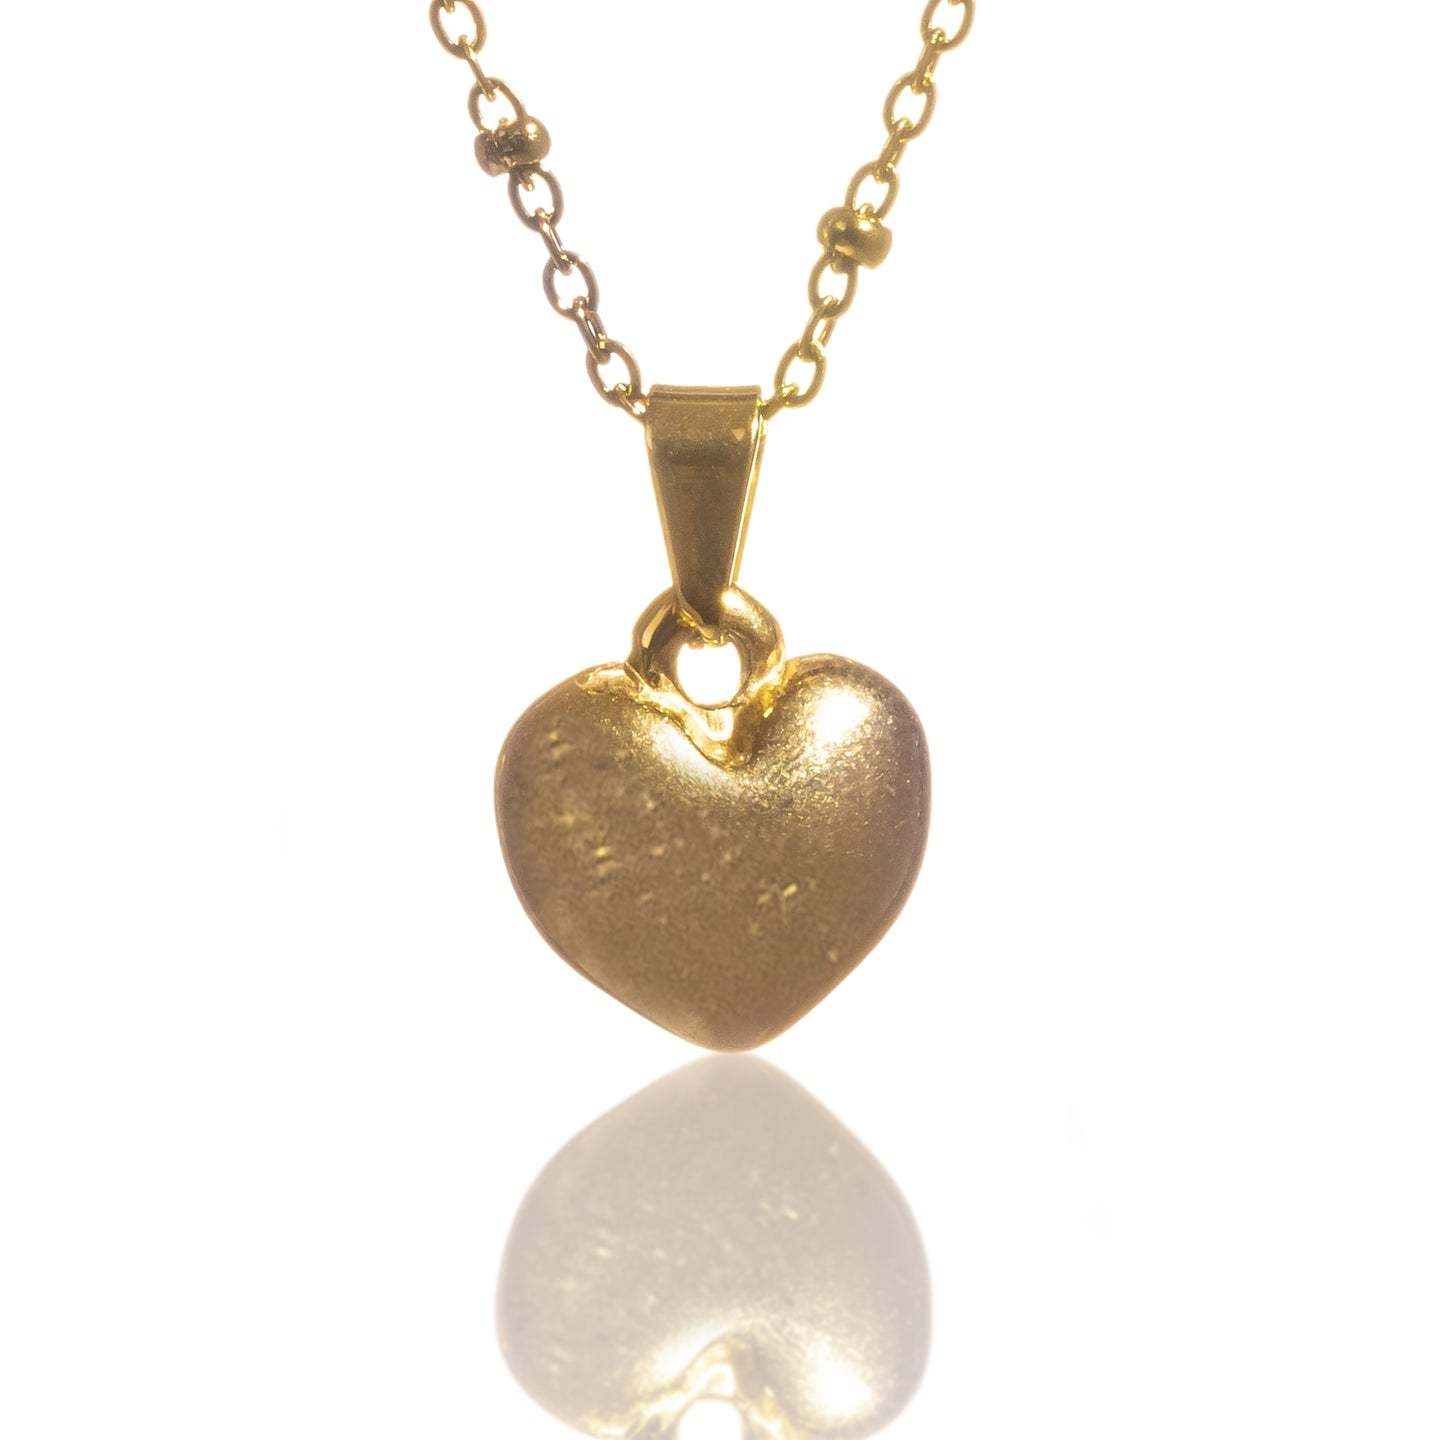 A simple pretty heart pendant on a gold plated stainless steel satellite chain, 16inches in length with a 2 inch extension chain in gold colour